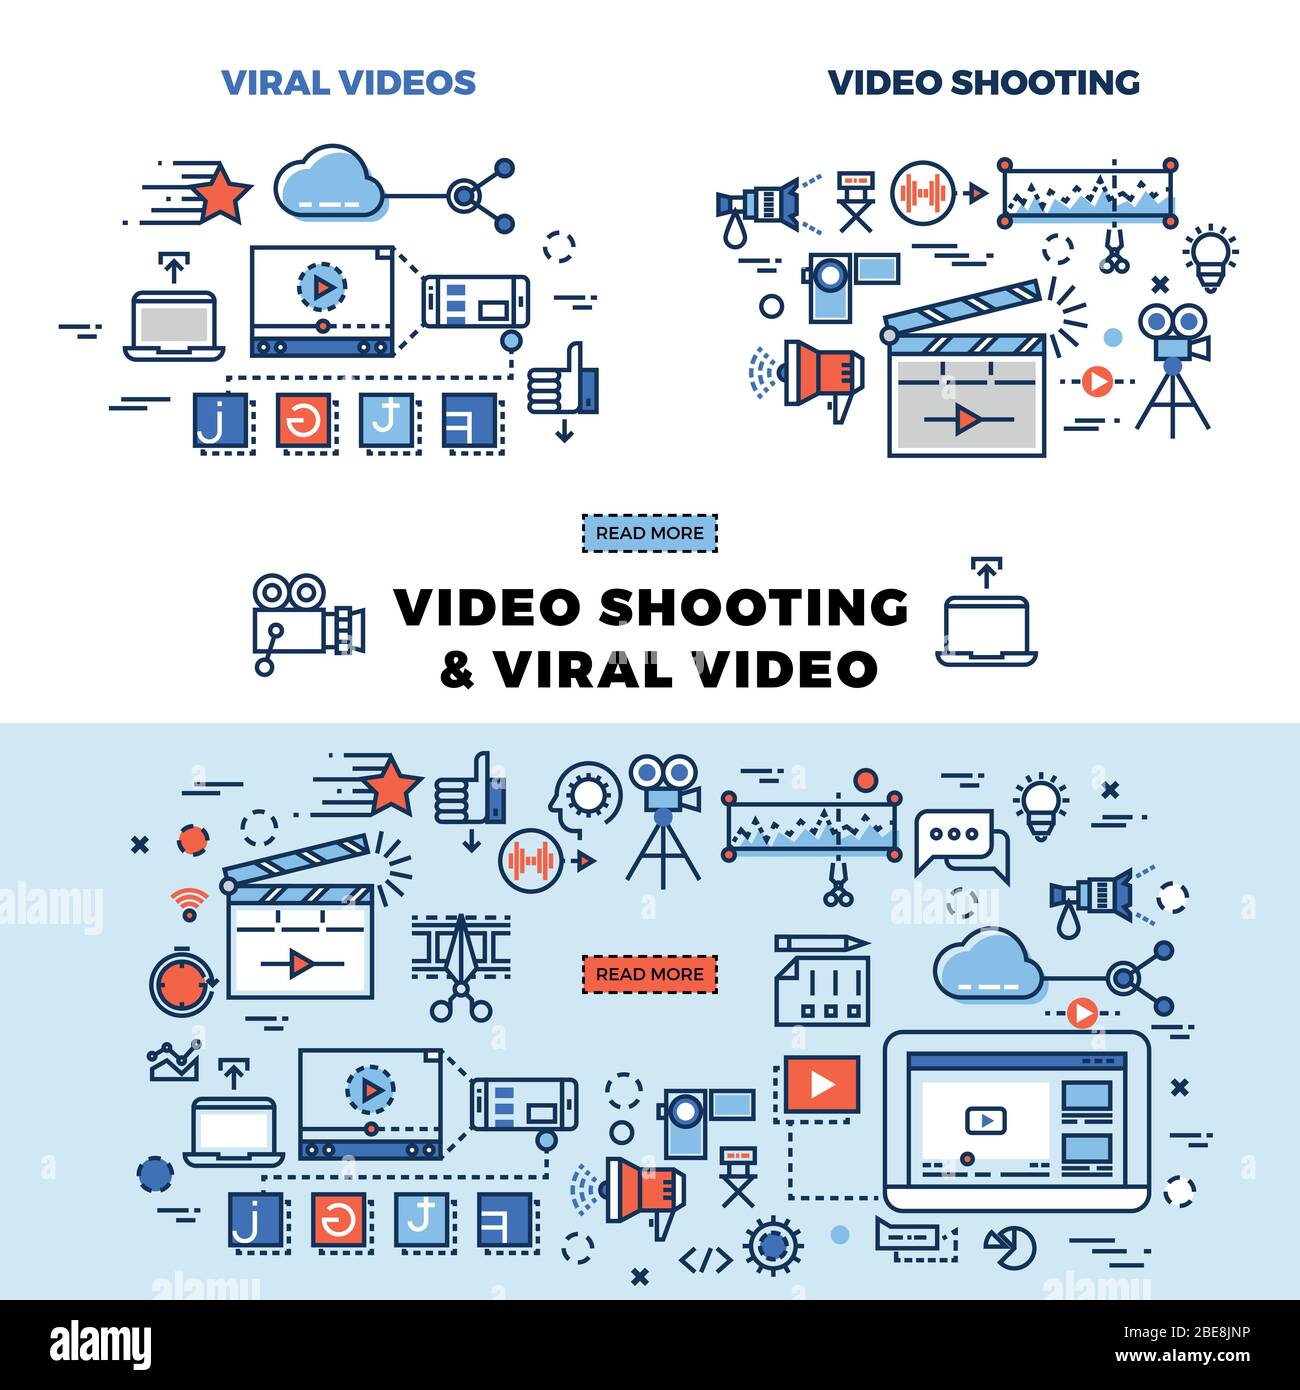 Viral video and video shooting information page. Viral video for internet marketing llustration Stock Vector